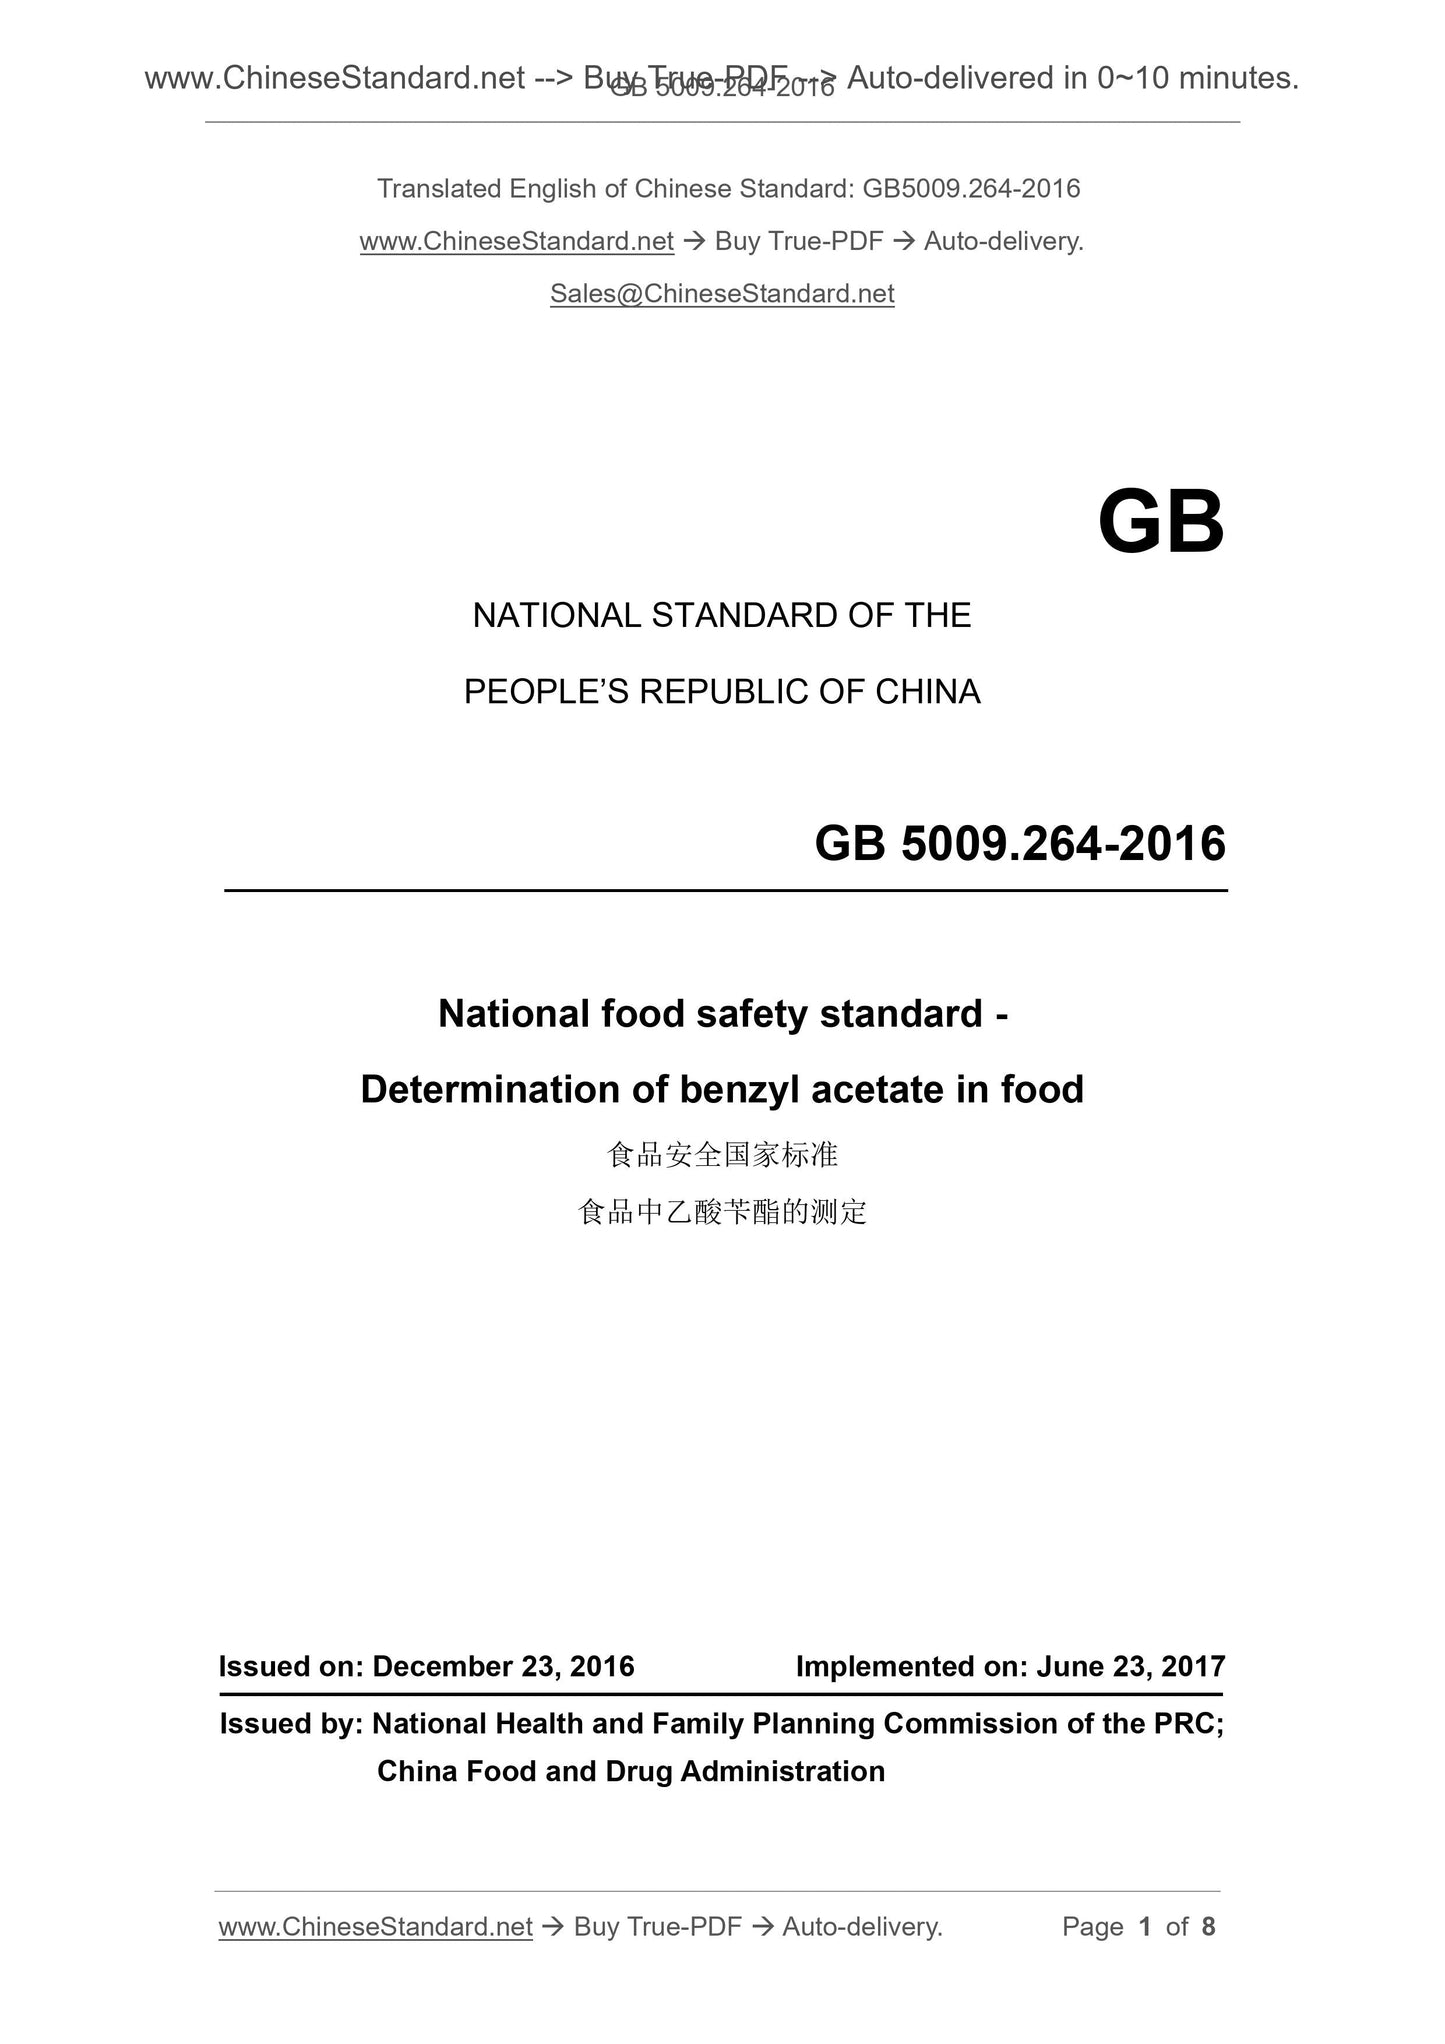 GB 5009.264-2016 Page 1